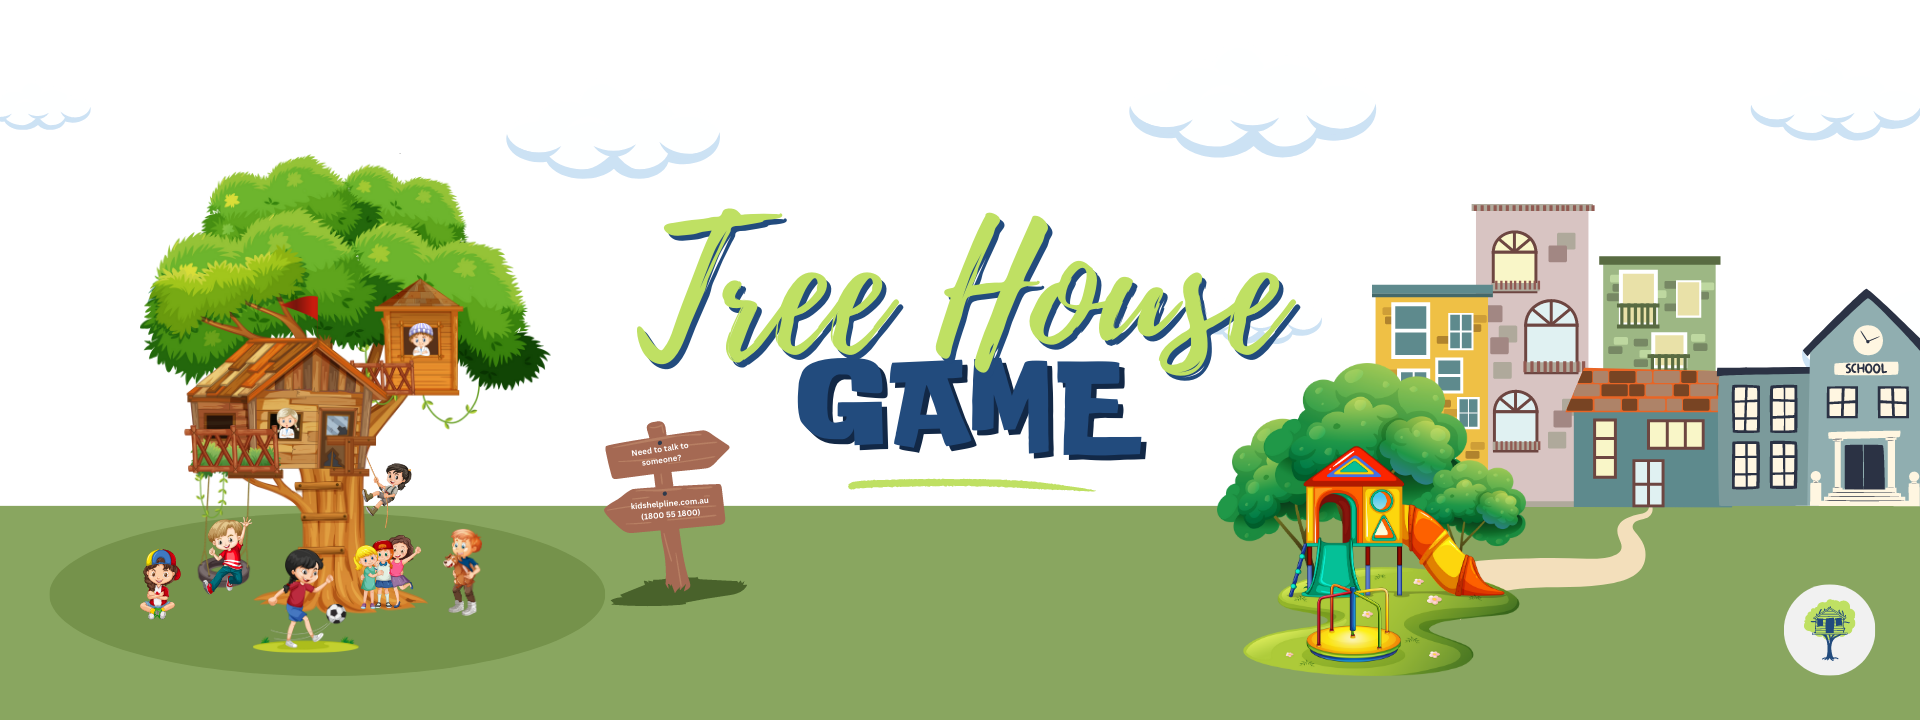 Tree House Game Banner (1920 × 720 px)